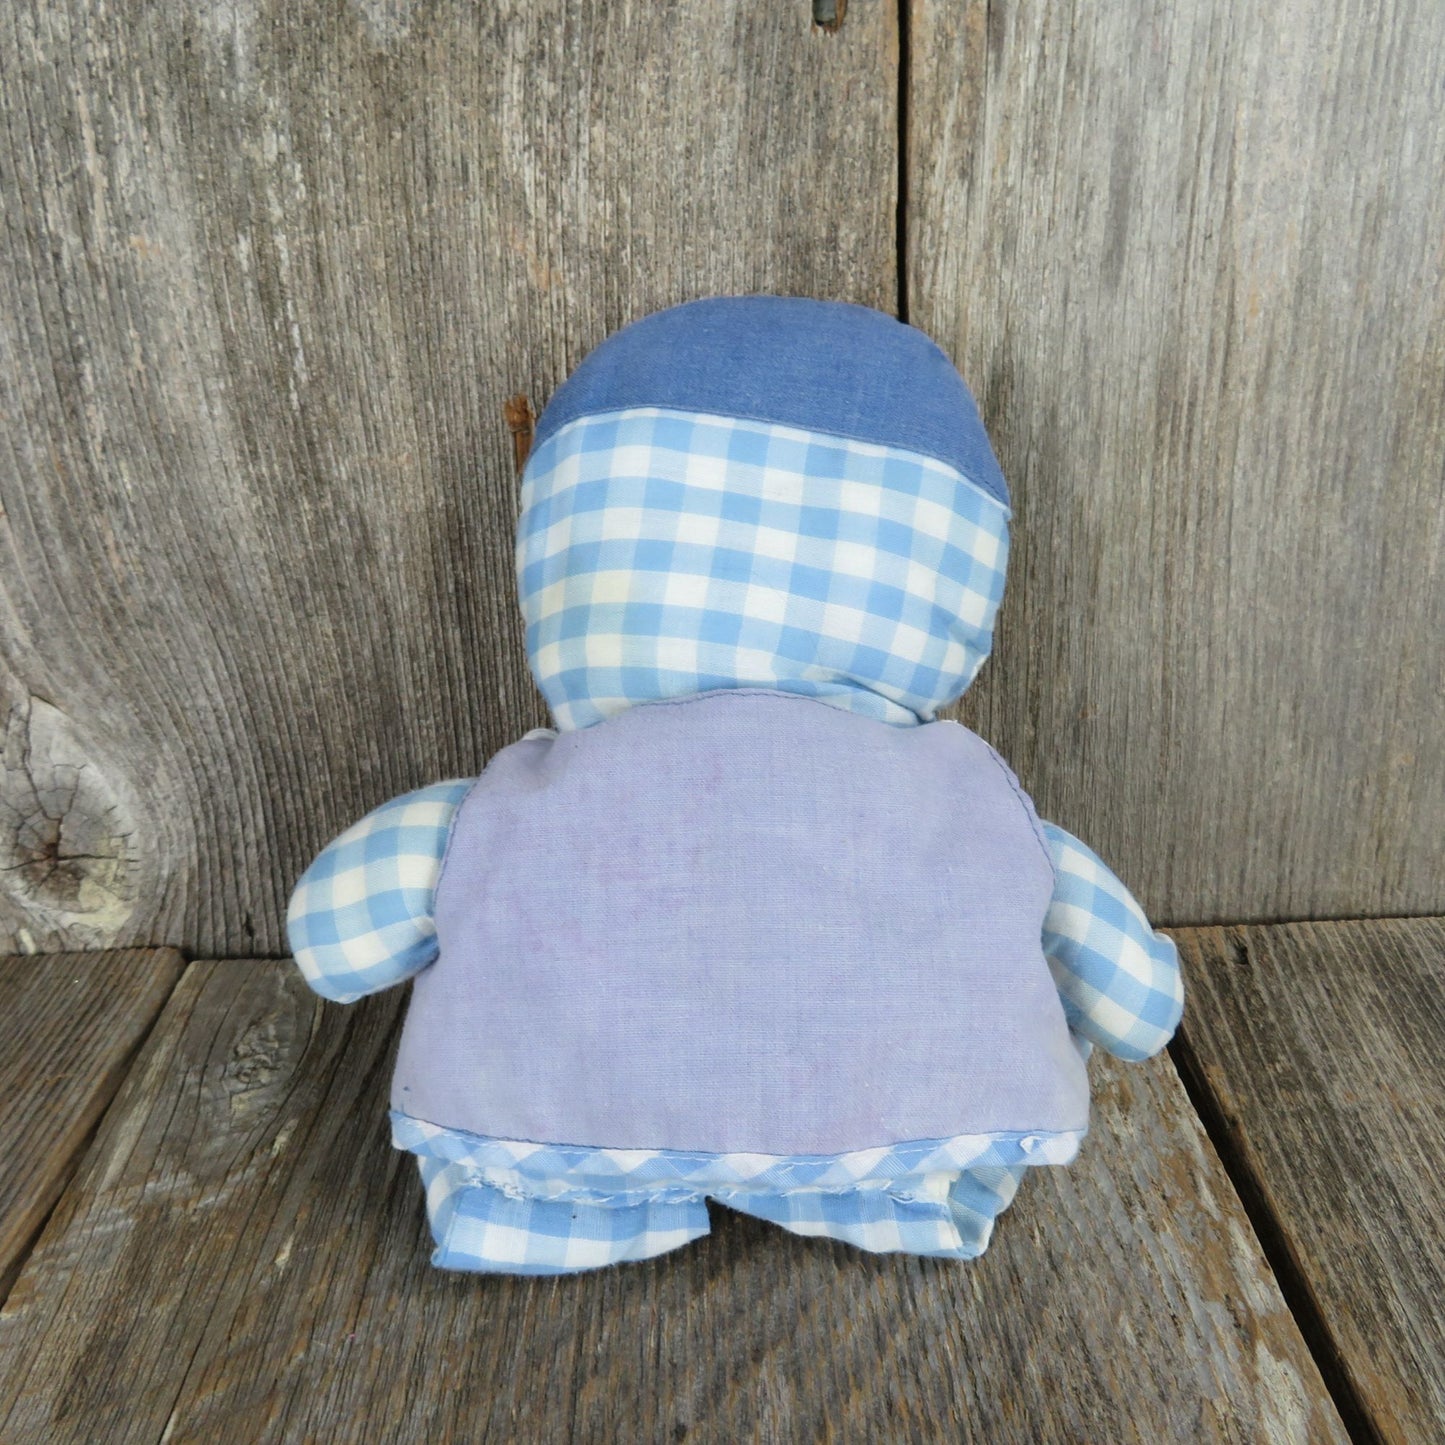 Blue and White Gingham Rag Doll Checkered Fabric Stitched Face Vest Vintage Boy Soft Body